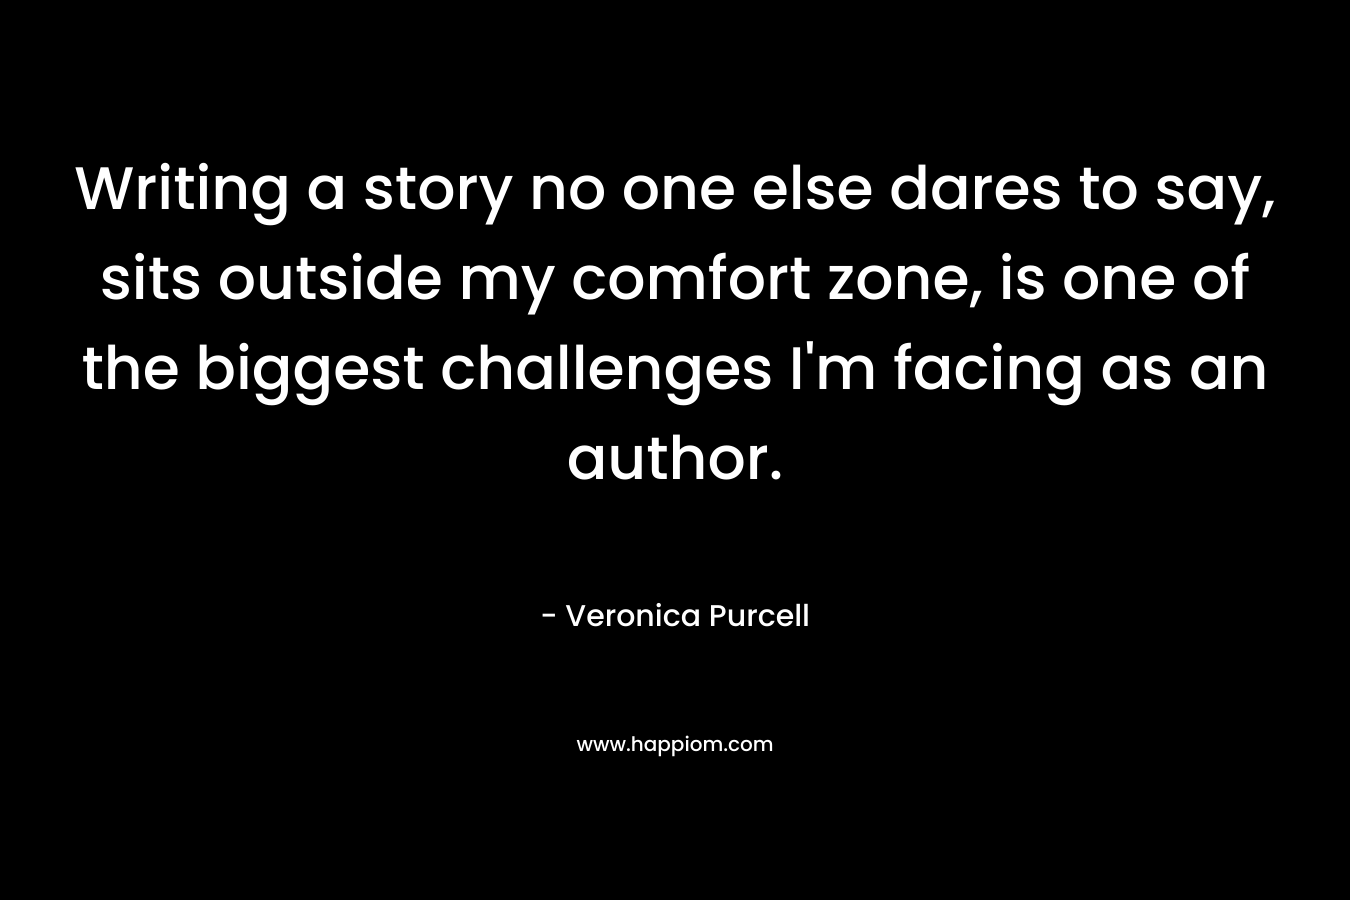 Writing a story no one else dares to say, sits outside my comfort zone, is one of the biggest challenges I’m facing as an author. – Veronica Purcell